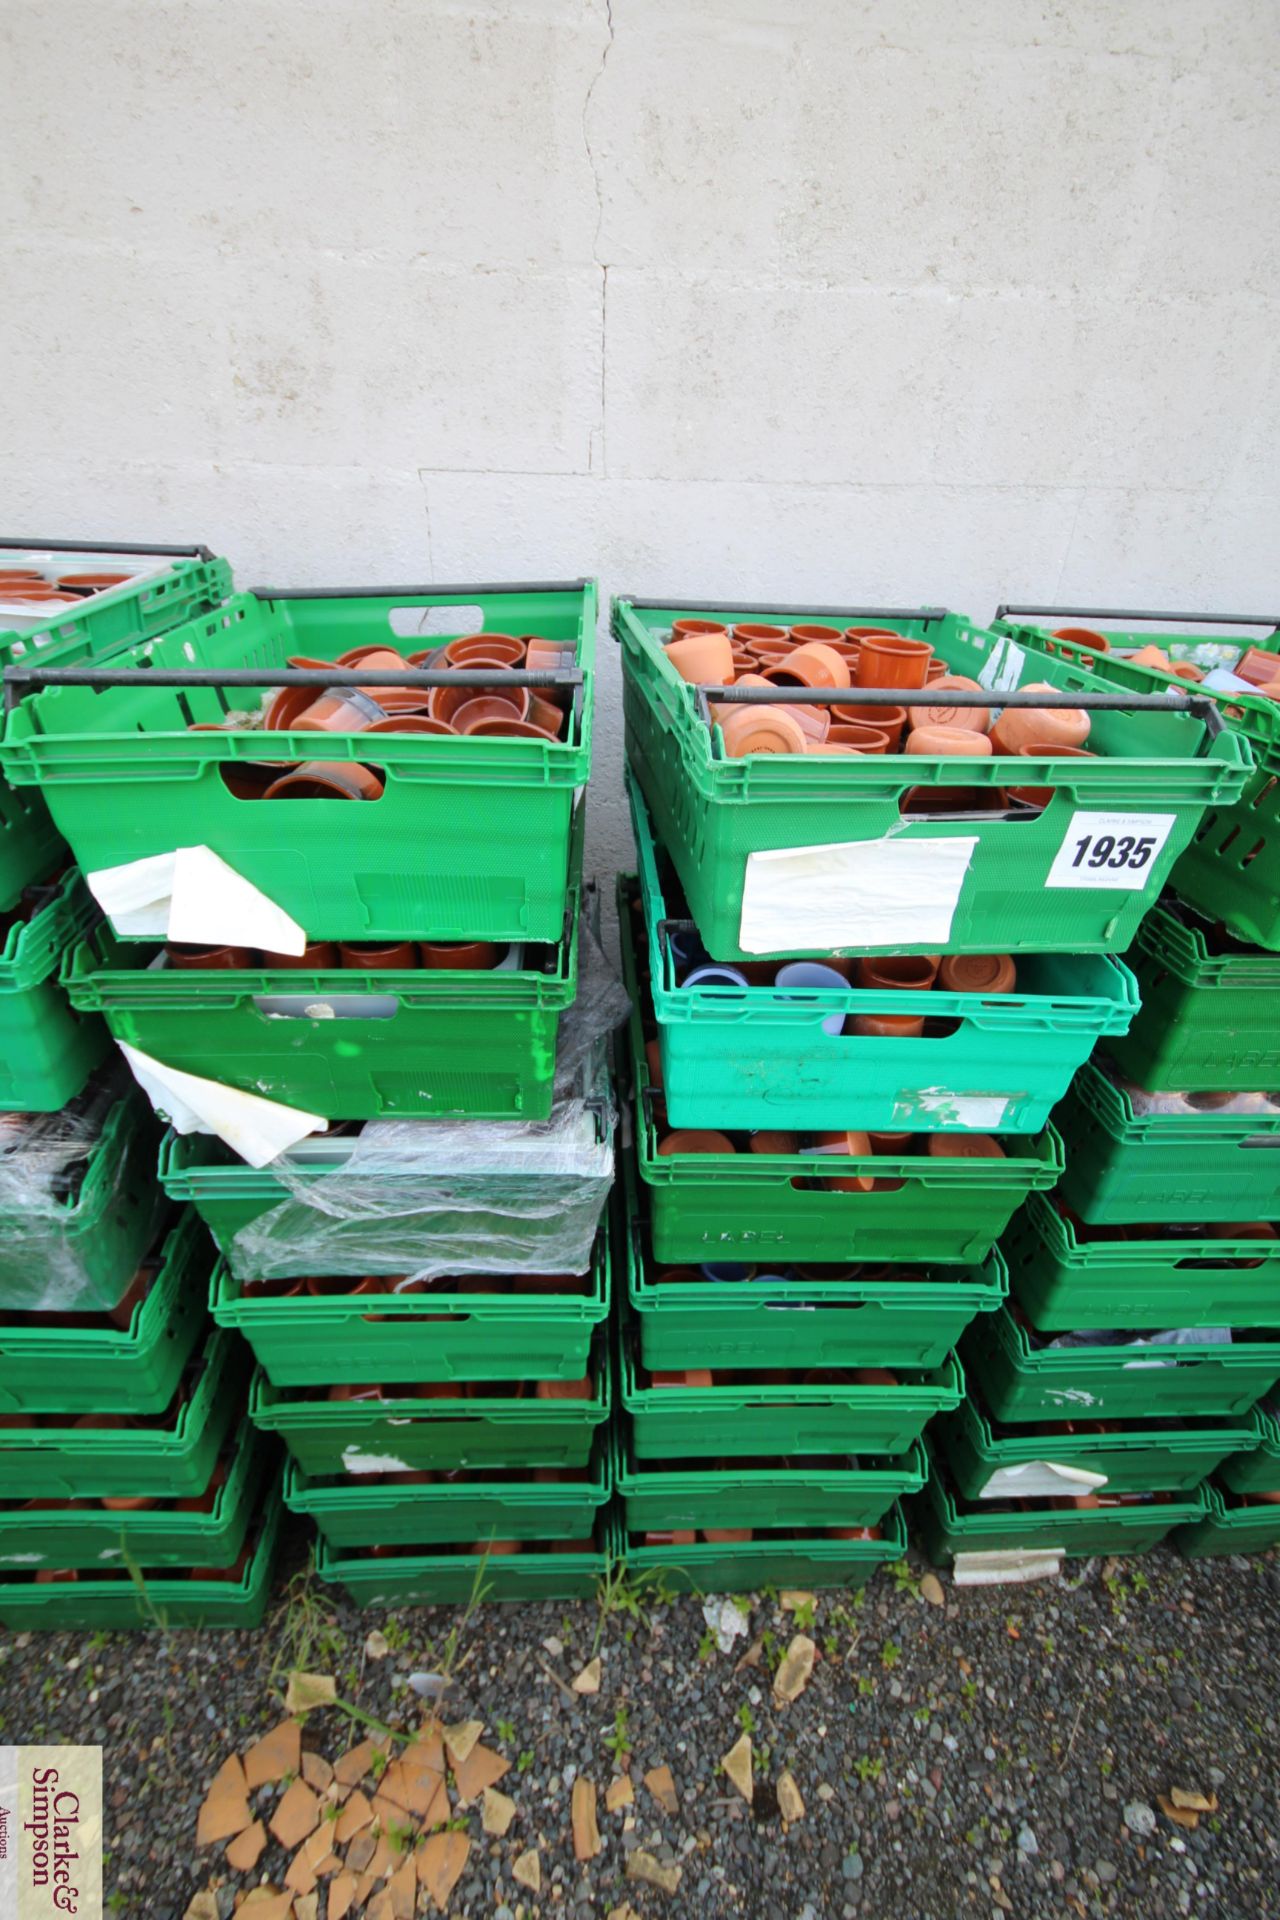 14x stacking vegetable crates. Containing a large